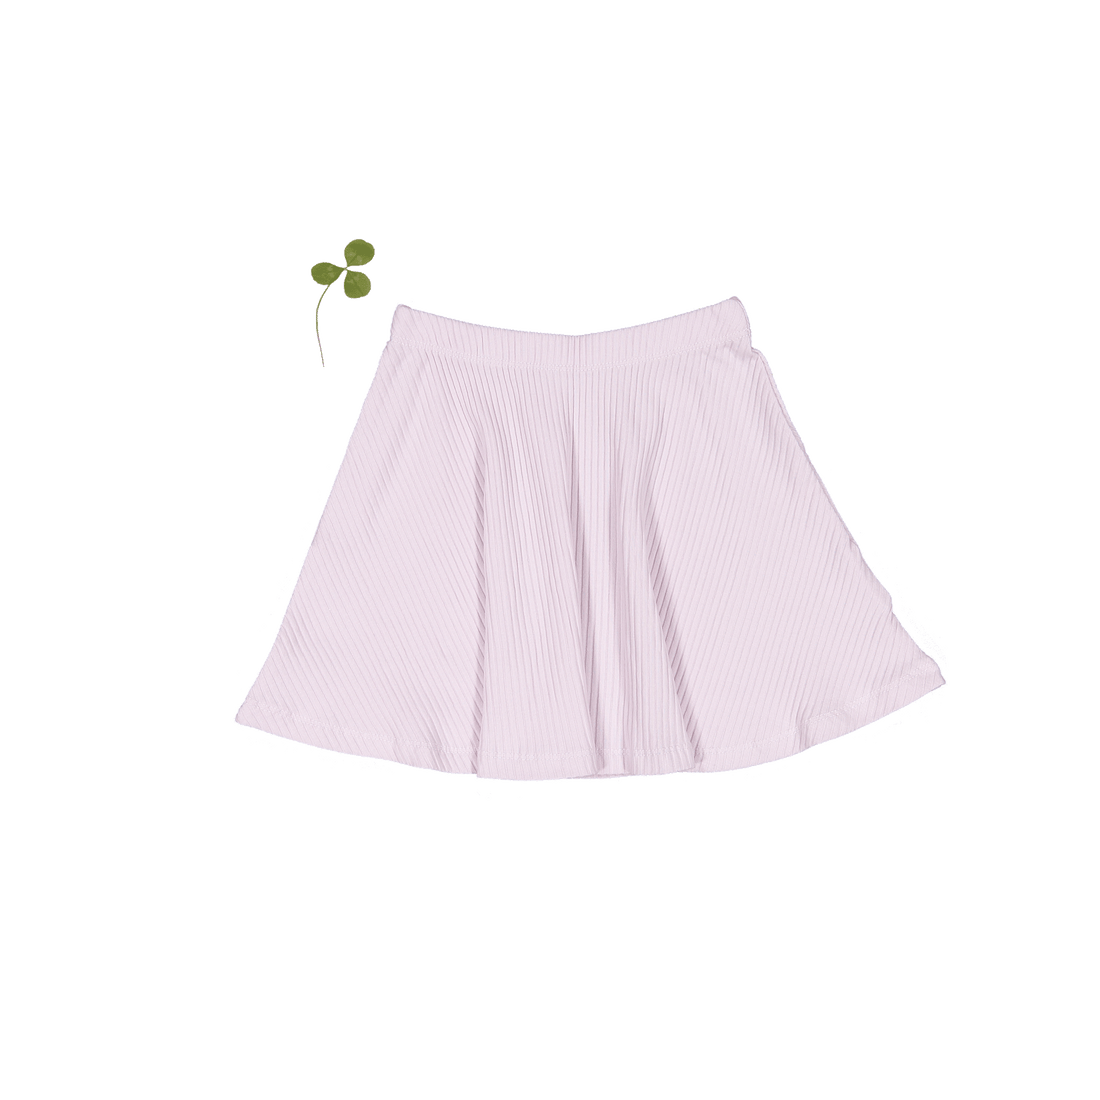 The Skirt - Lilac